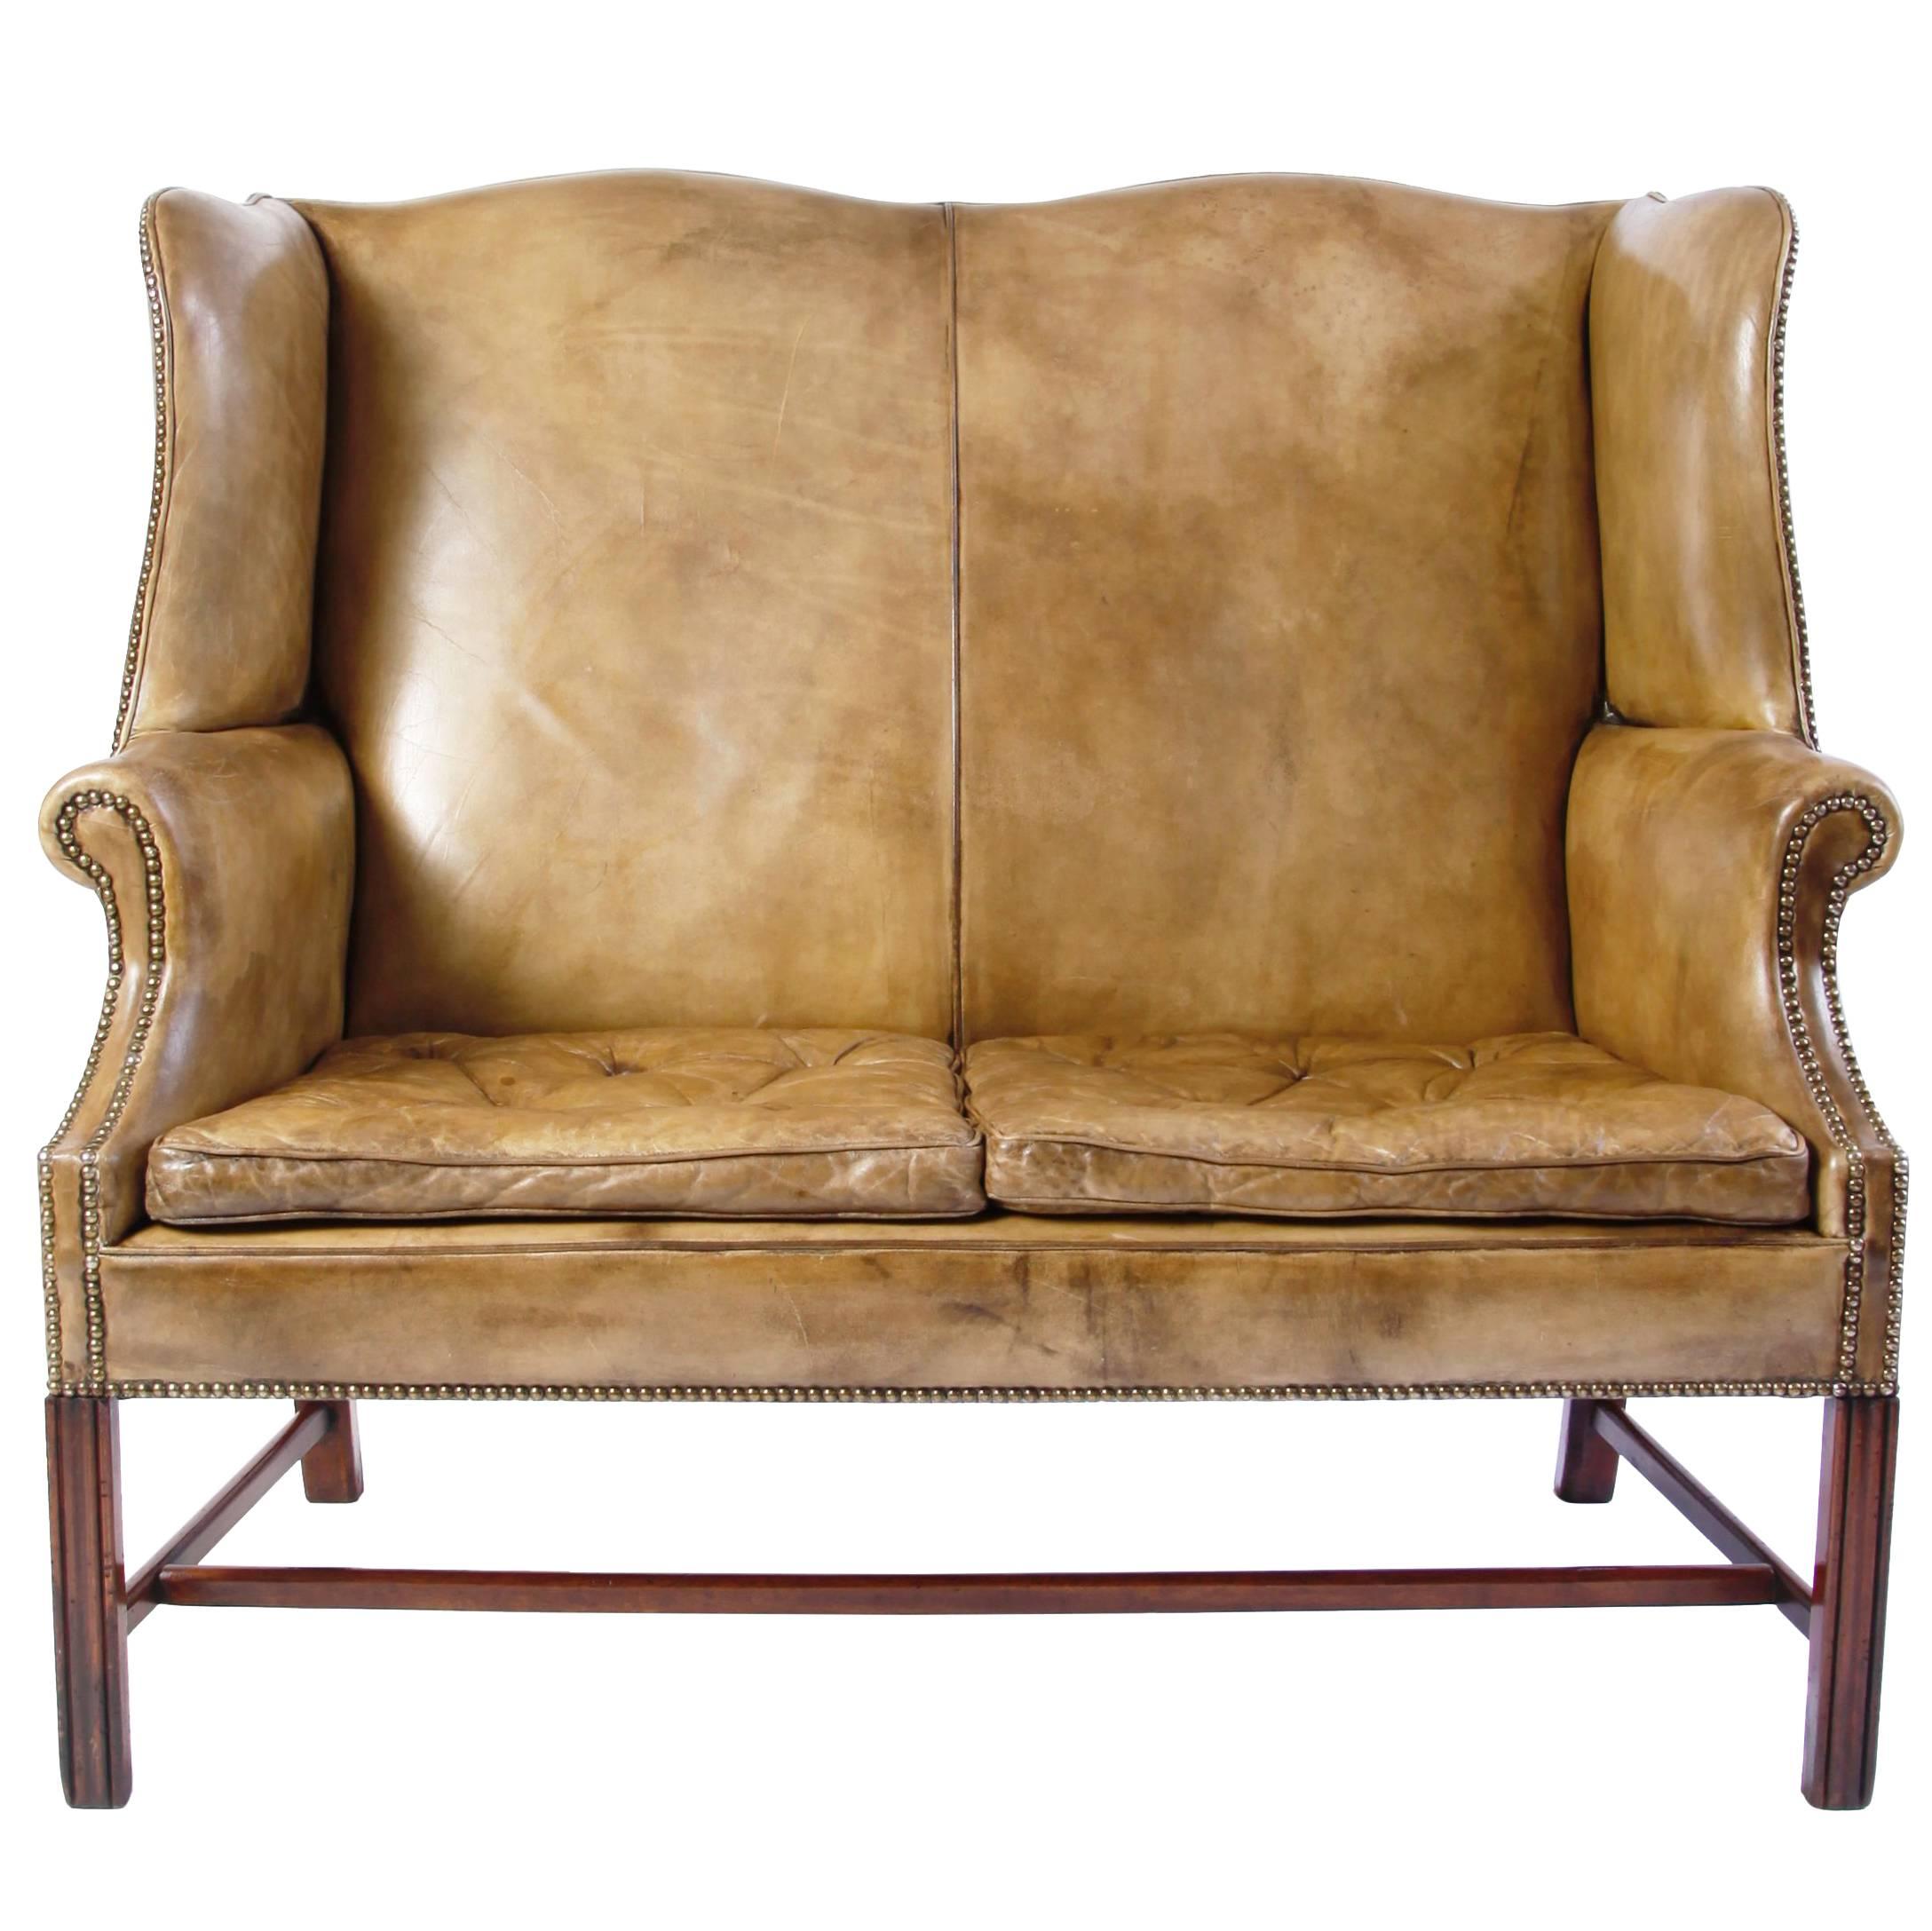 English High Back Leather Settee